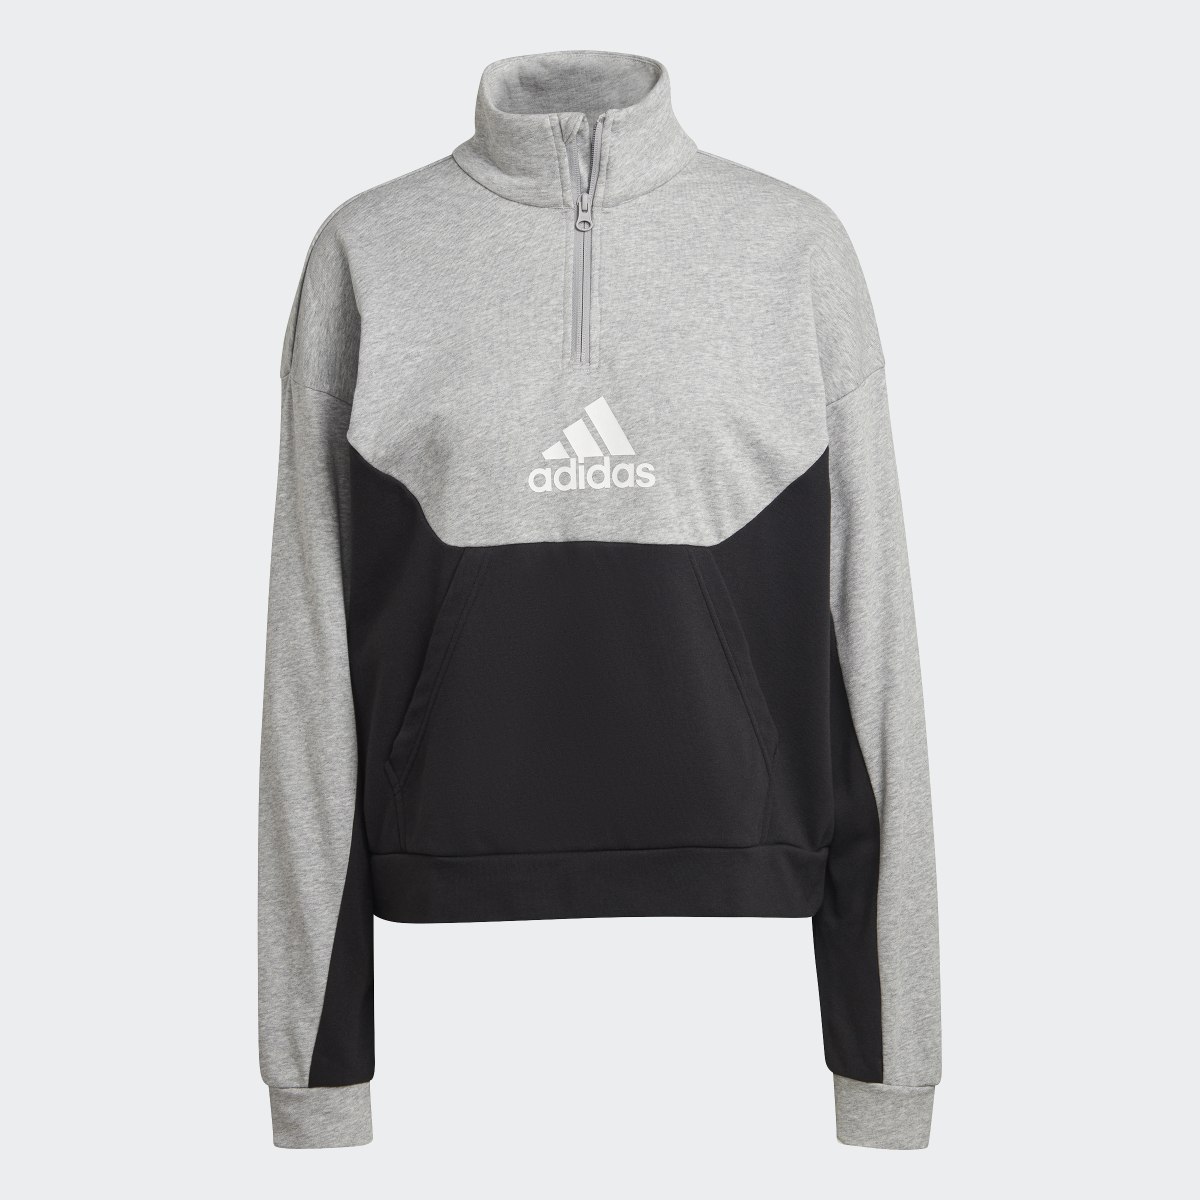 Adidas Half-Zip and Tights Tracksuit. 6